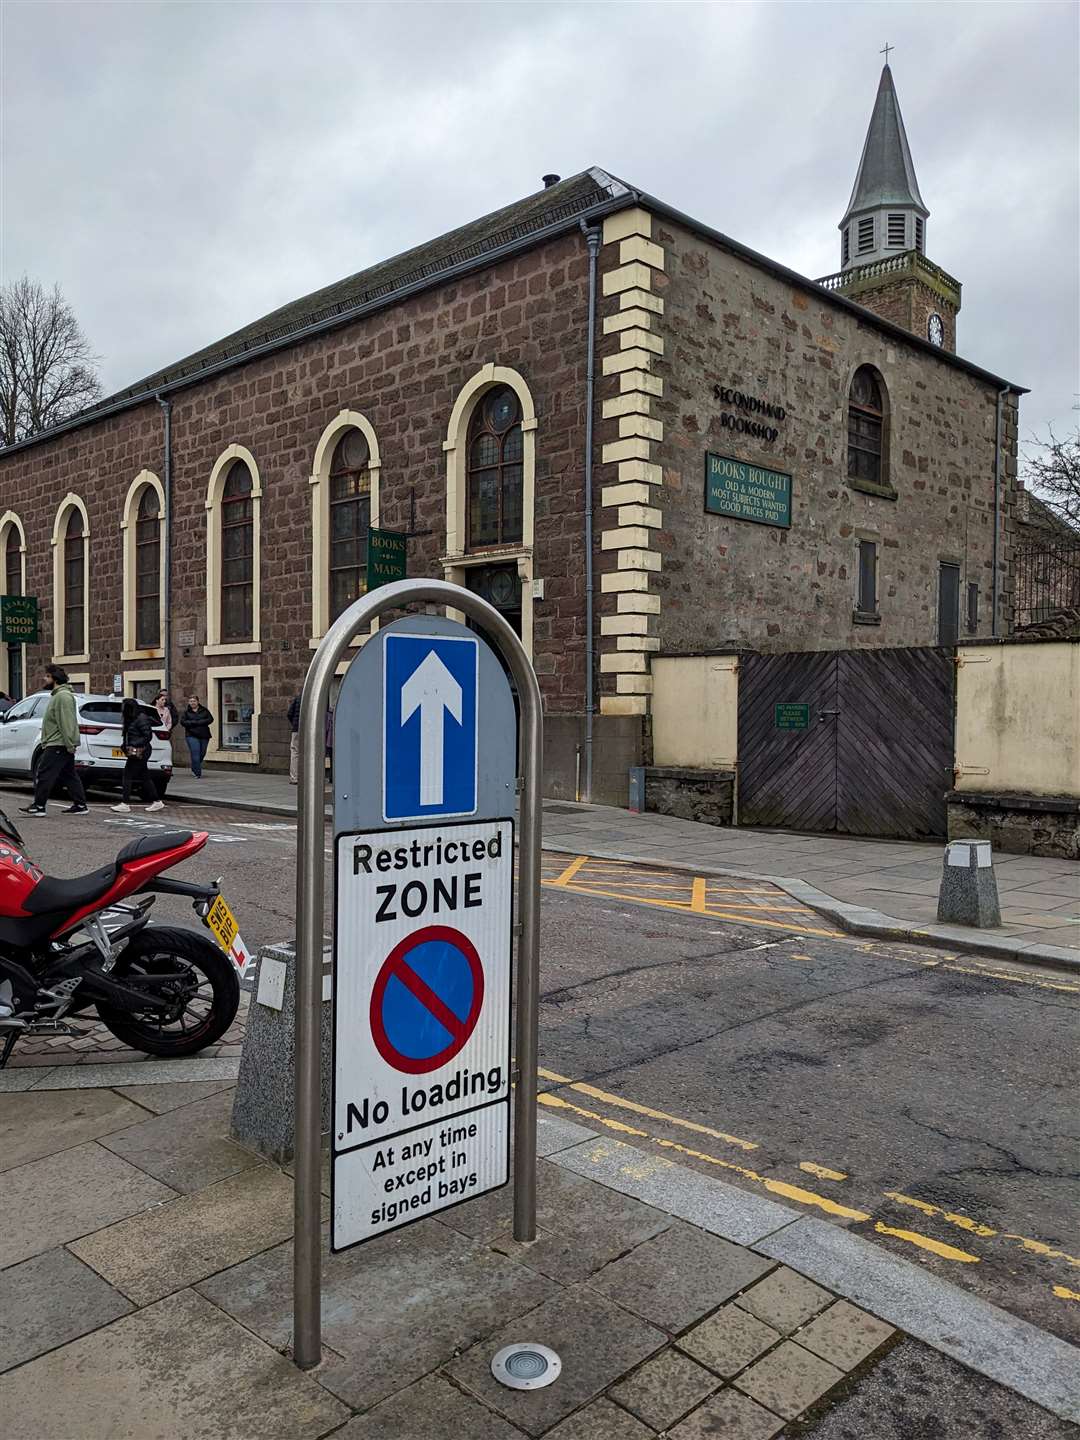 The sign at the entrance to Church Street says 'Restricted Zone' but a ruling found it should say 'Restricted Parking Zone.'